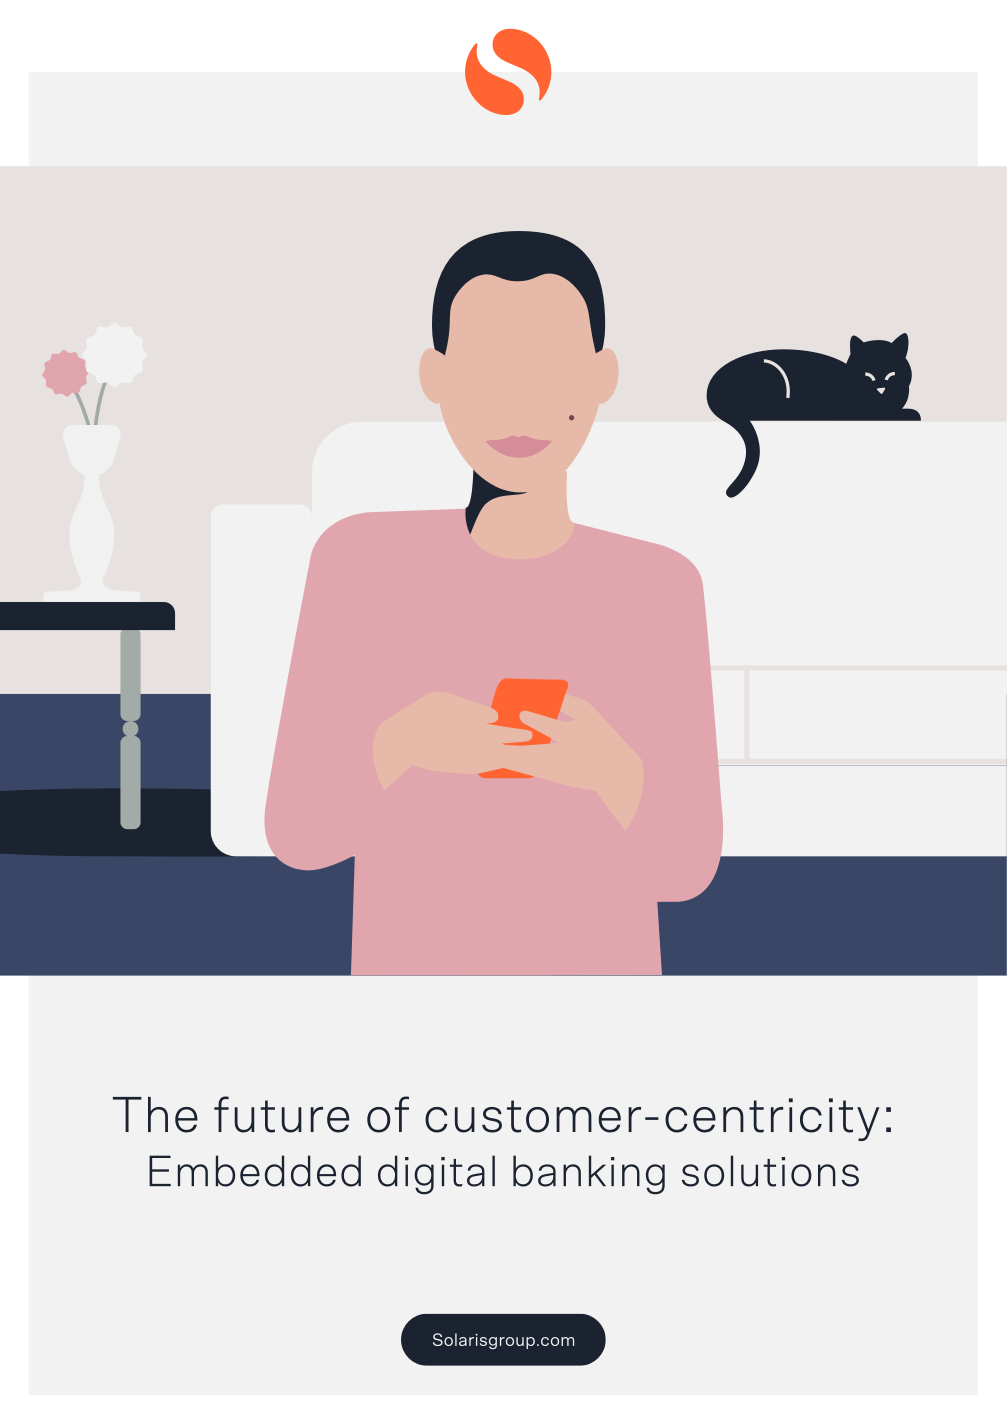 The future of customer-centricity: Embedded digital banking solutions